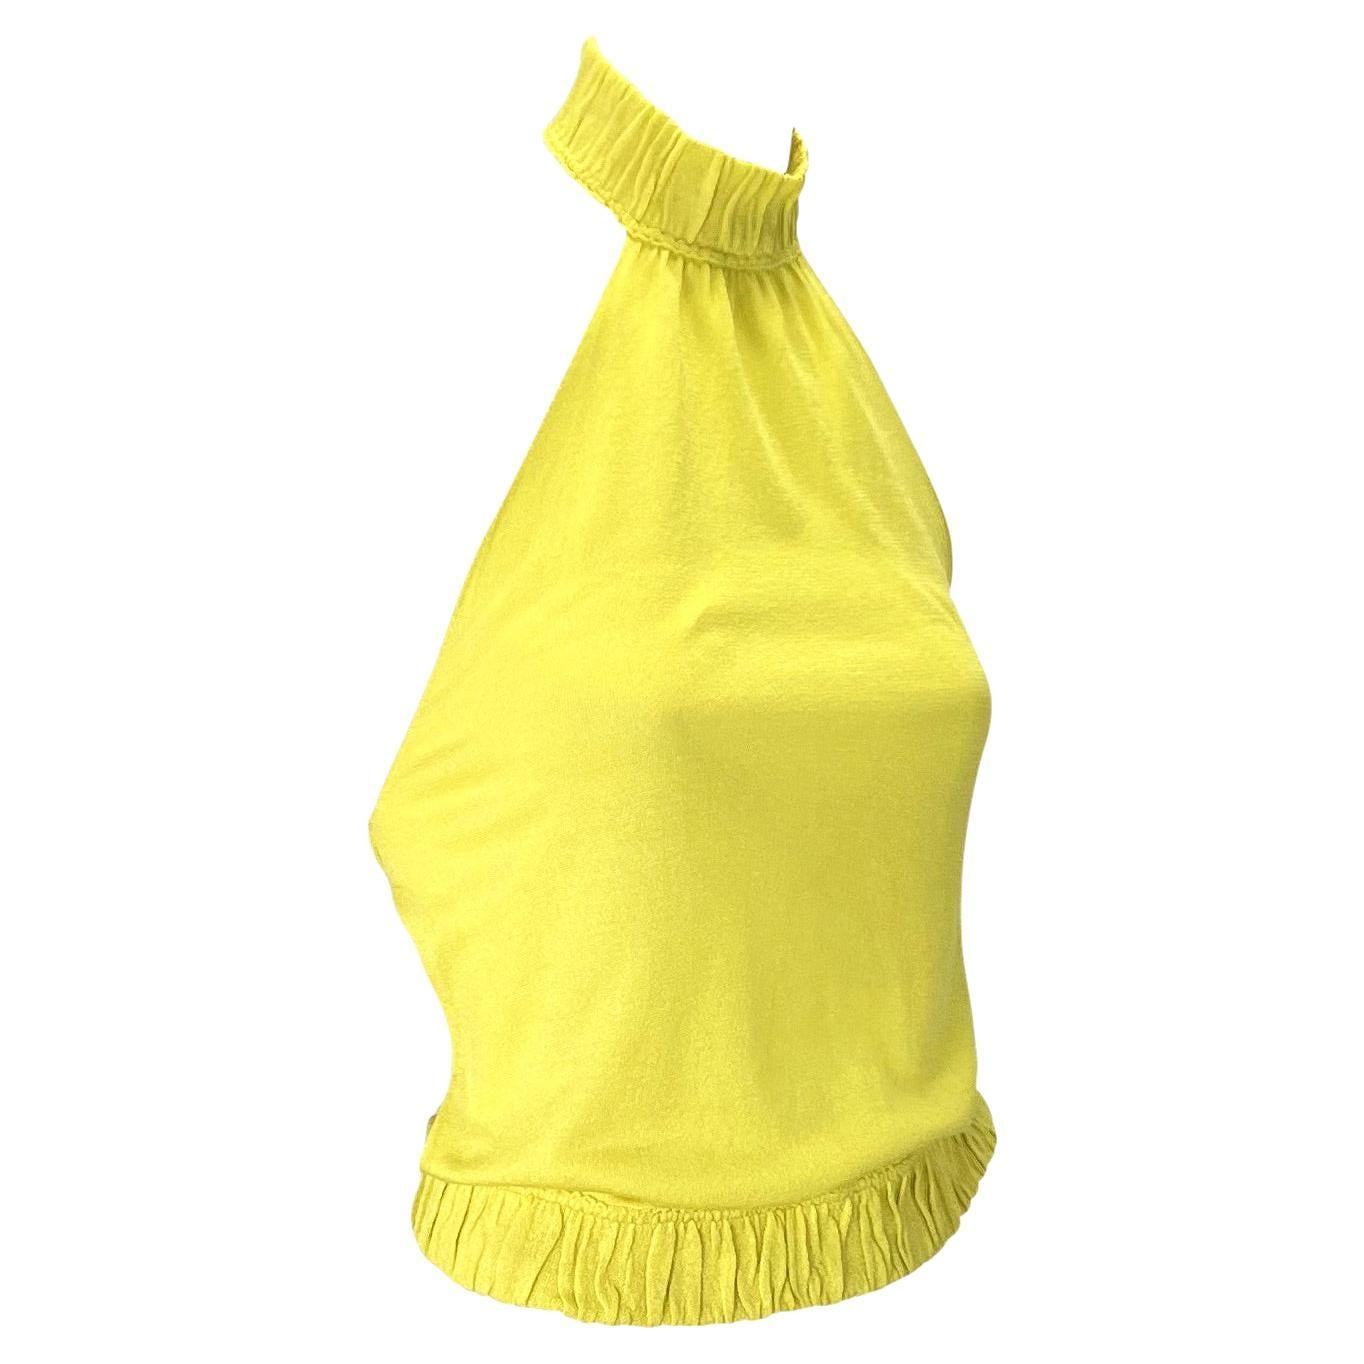 Presenting an electric yellow backless Gucci knit top, designed by Tom Ford. From the Spring/Summer 1999 collection, this semi-sheer silk top is fashioned with three stretchy bands which fit around the neck, mid-back, and waist leaving the majority